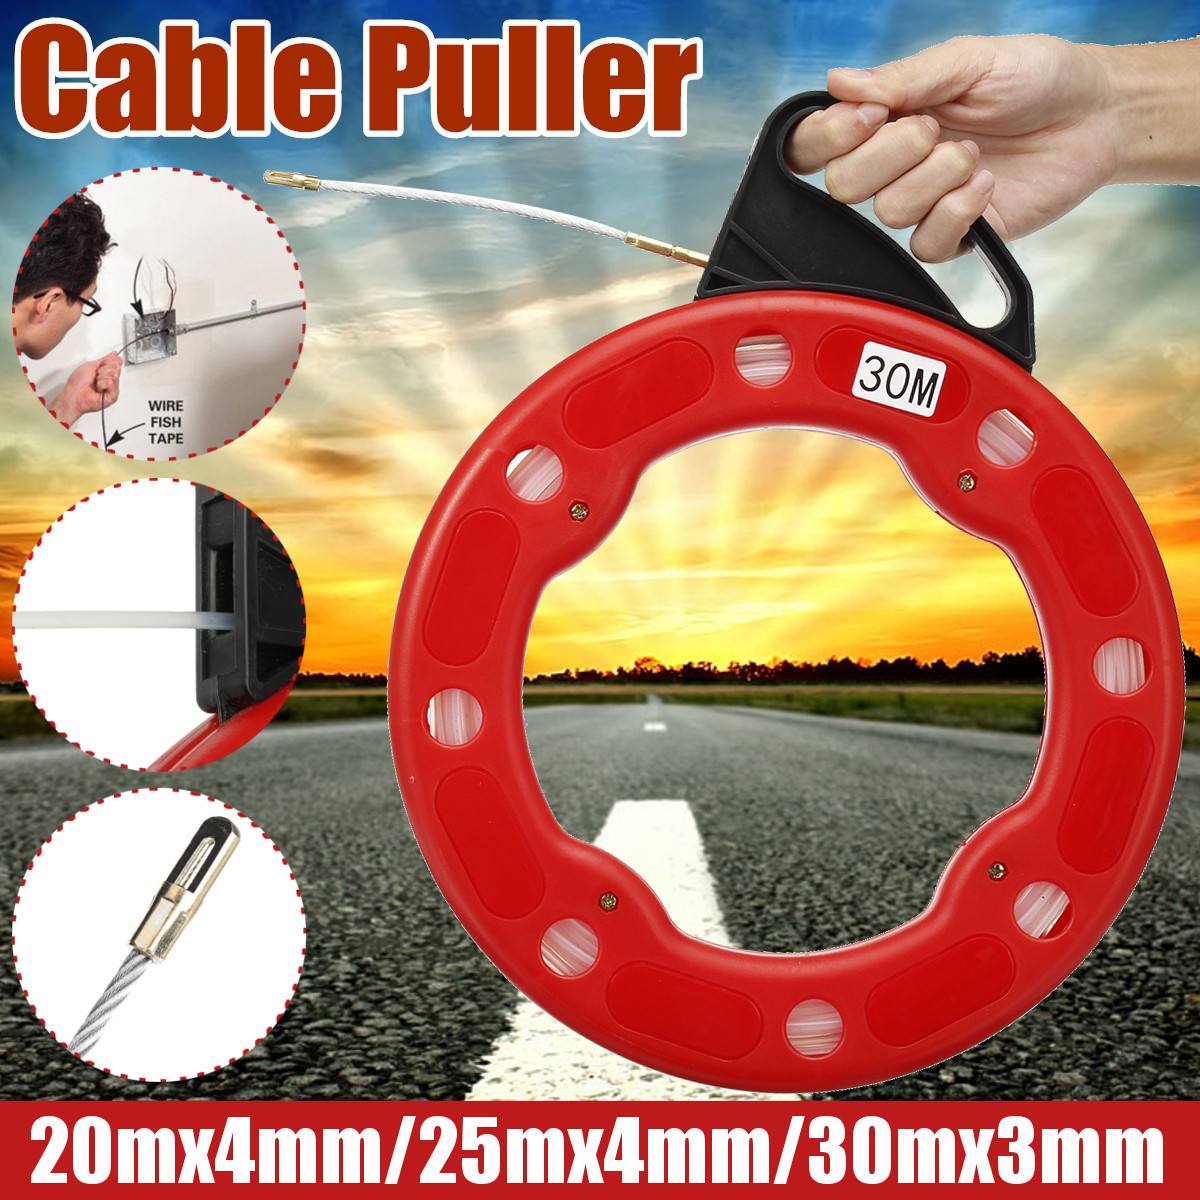 30M 3mm Fiberglass Fish Tape Reel Puller Conduit Ducting Rodder Pulling Wire Cable Red Ducting Rodder Pulling Wire Cable Puller